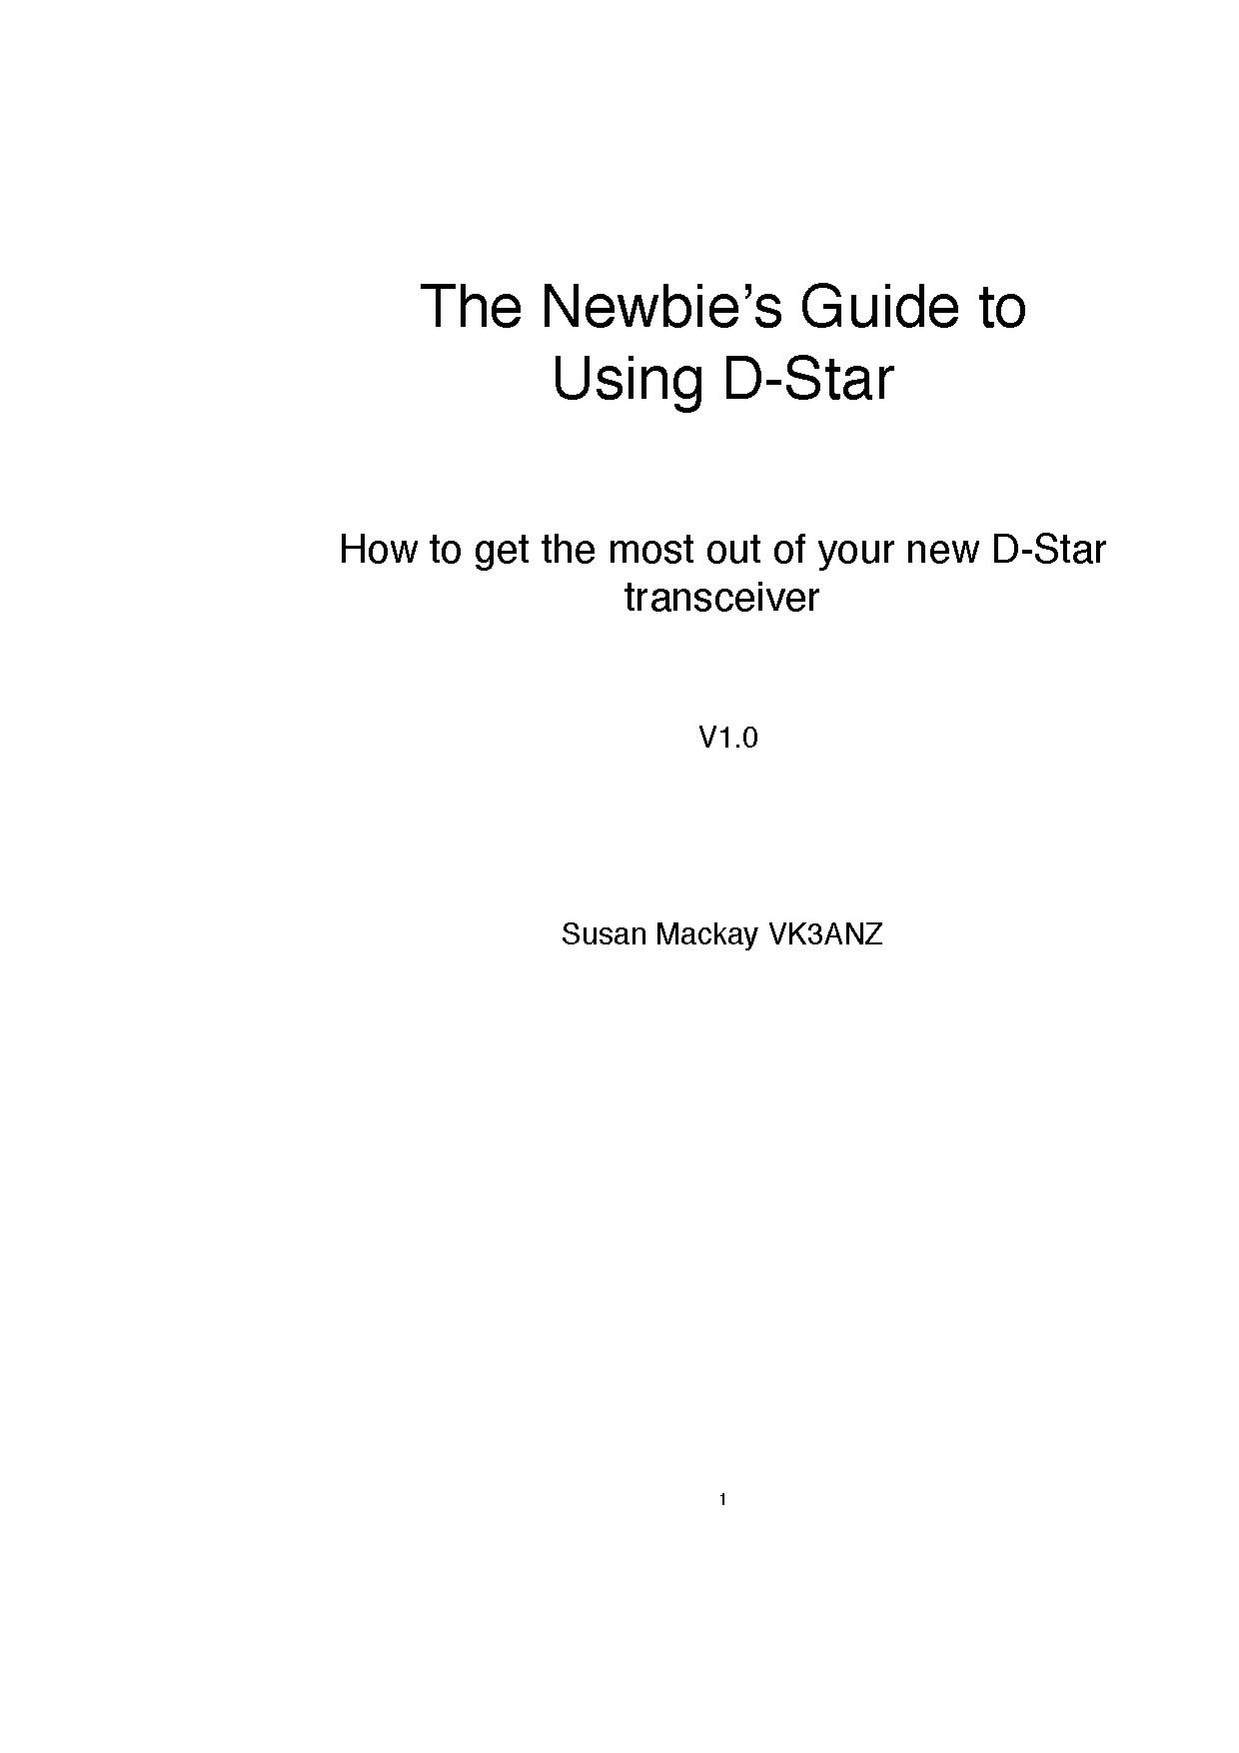 Newbies Guide to D-Star.pdf